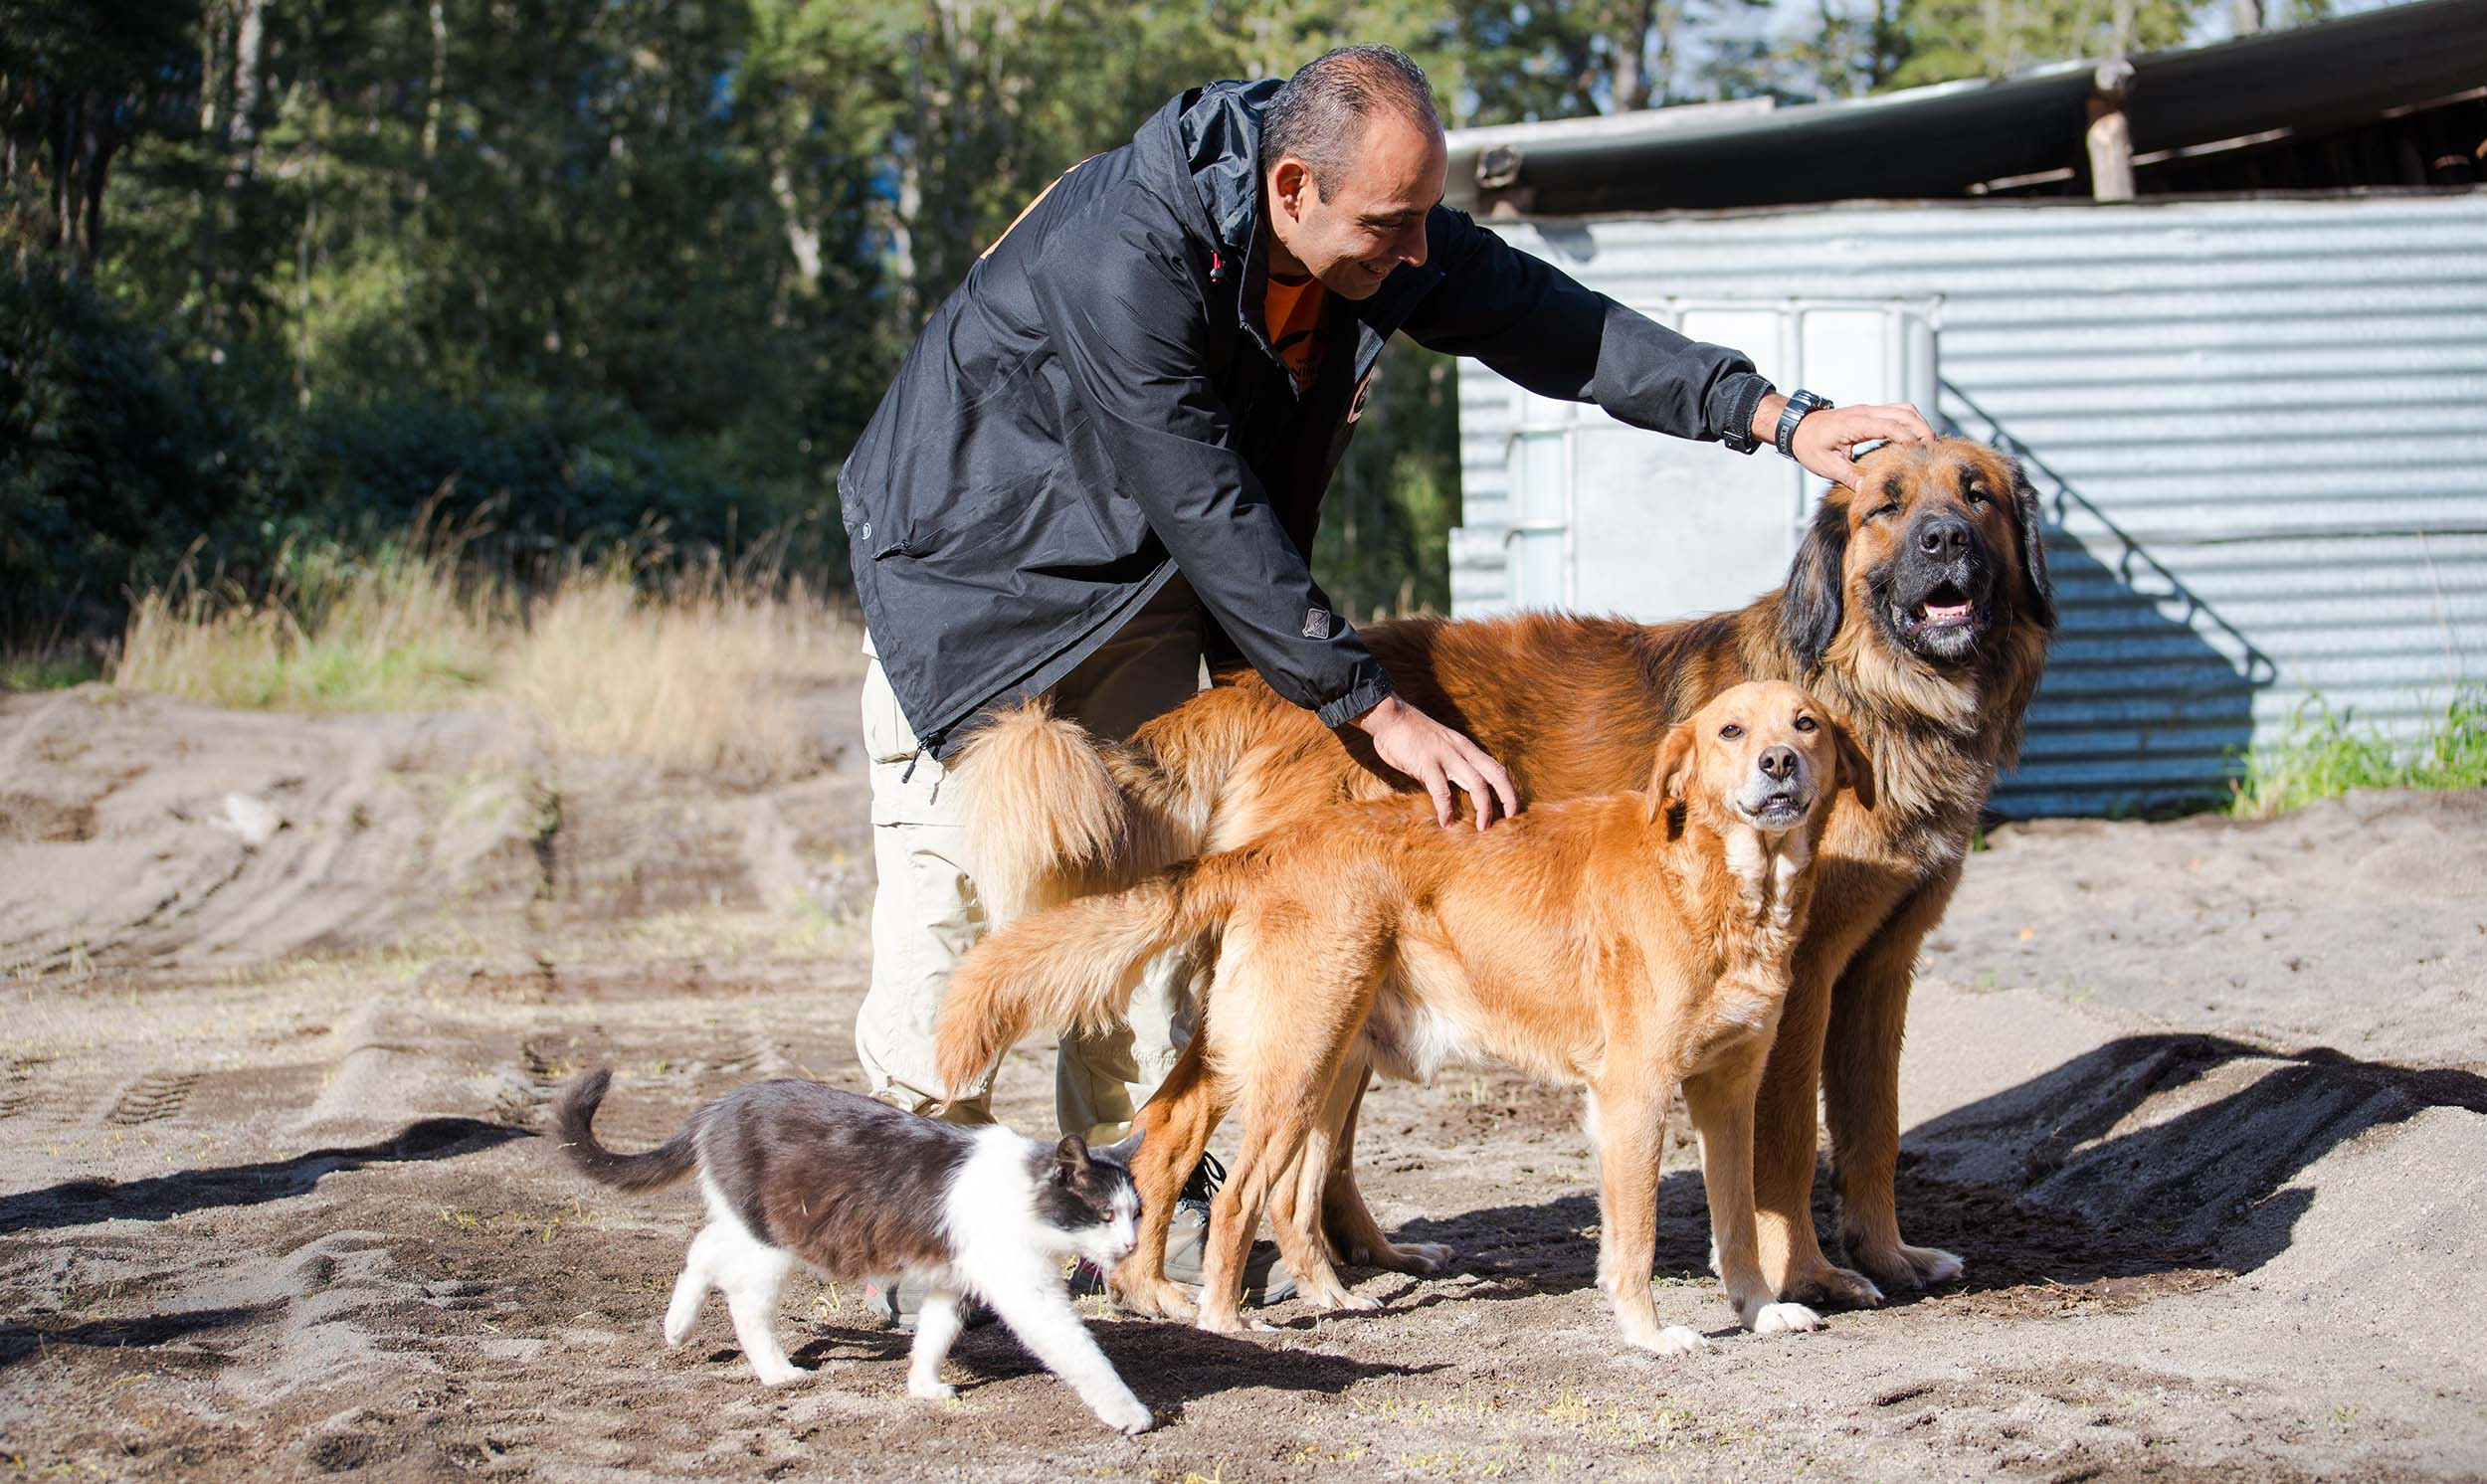 World Animal Protectoin's Sergio Vasquez is part of the disaster response team helping animals affected by the Calbuco Vocano eruption in Chile.